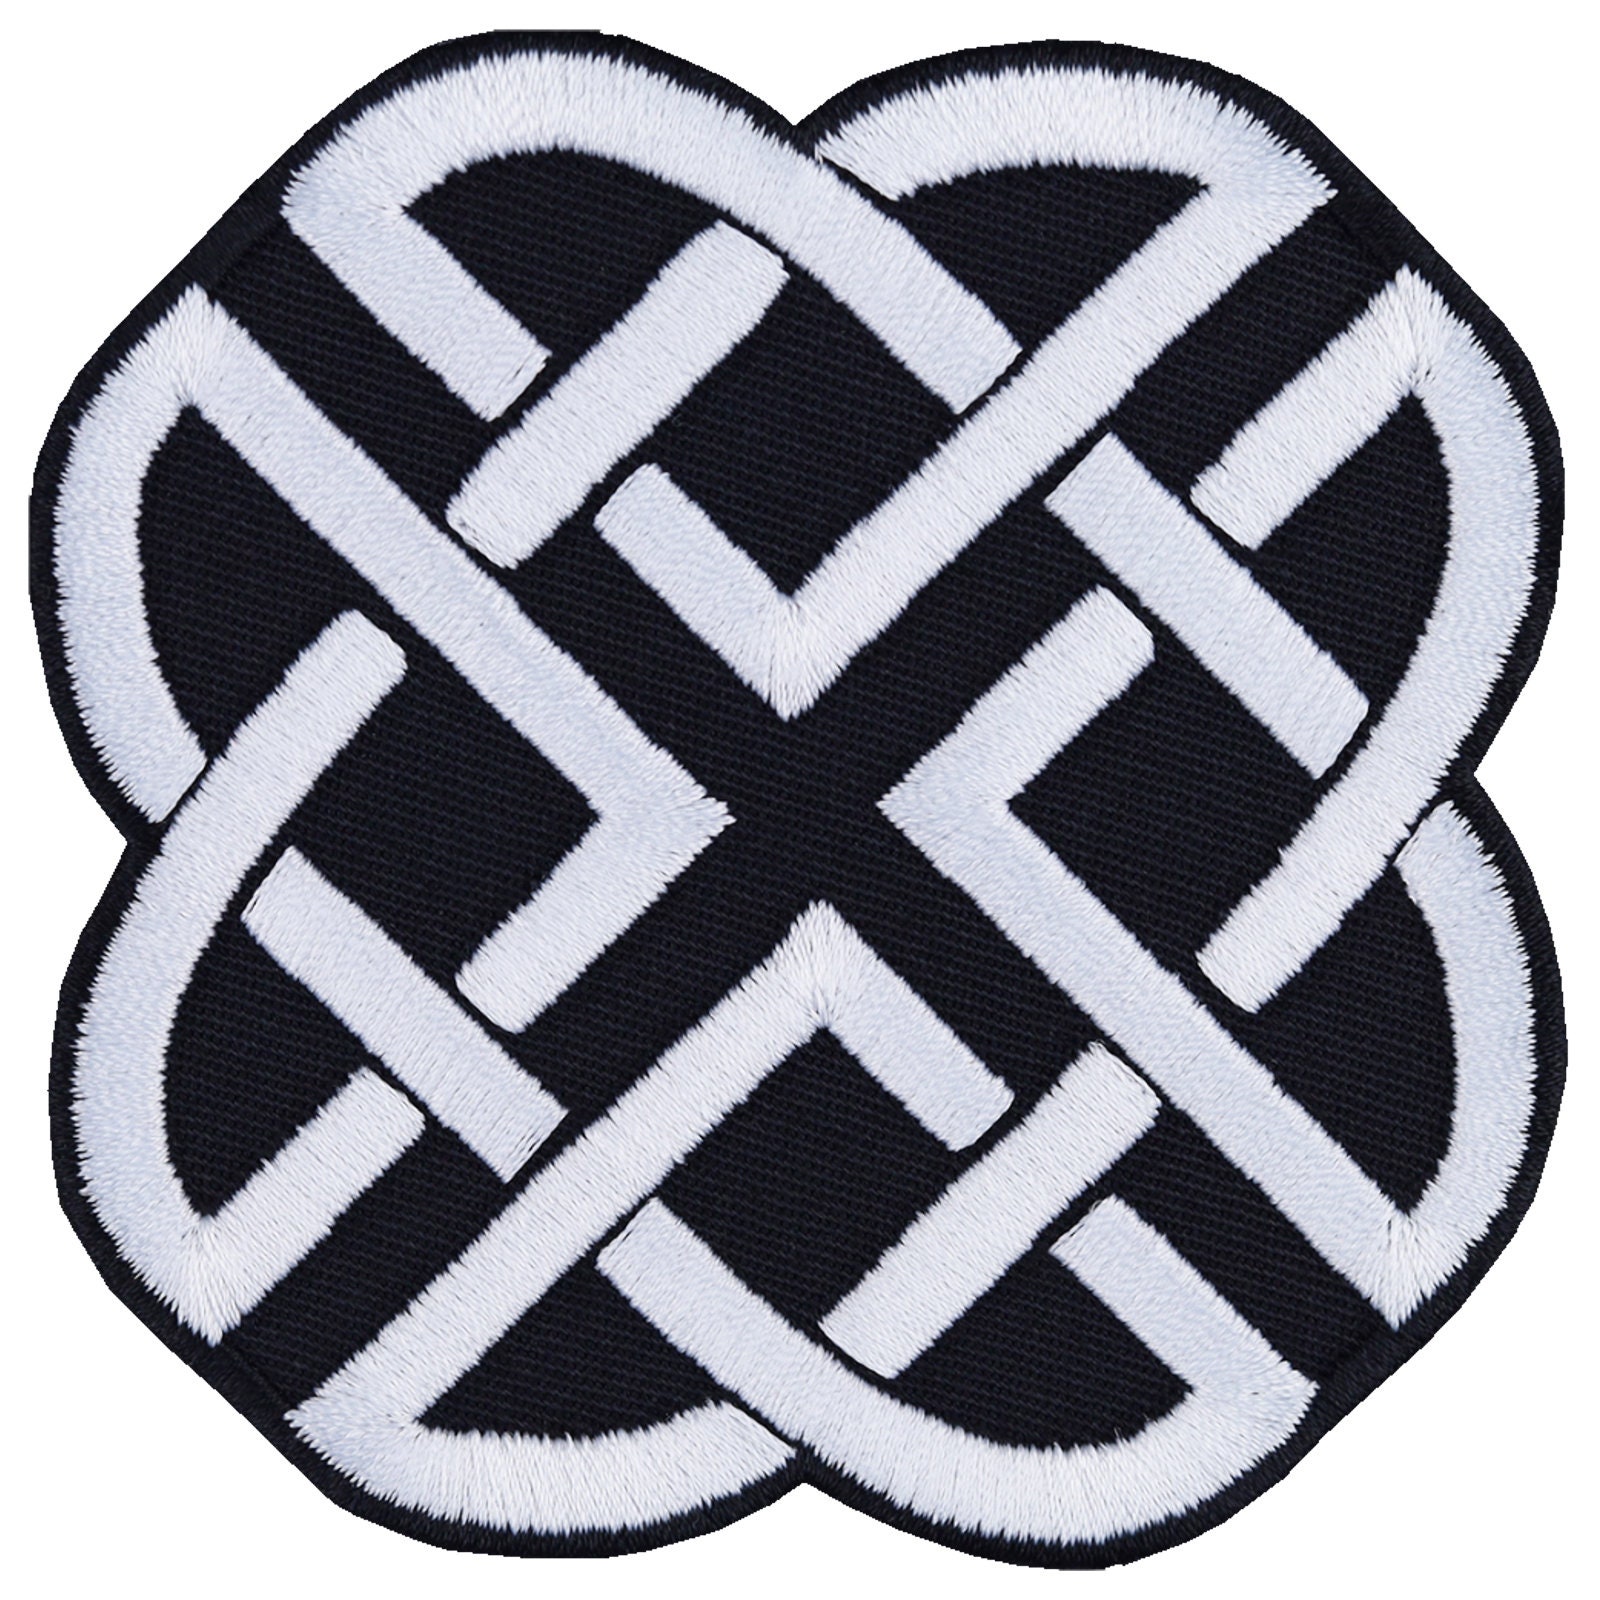 Buddhist Eternal Knot Patch Embroidered Iron on Buddhism Eternal Knot Fabric  Patch 